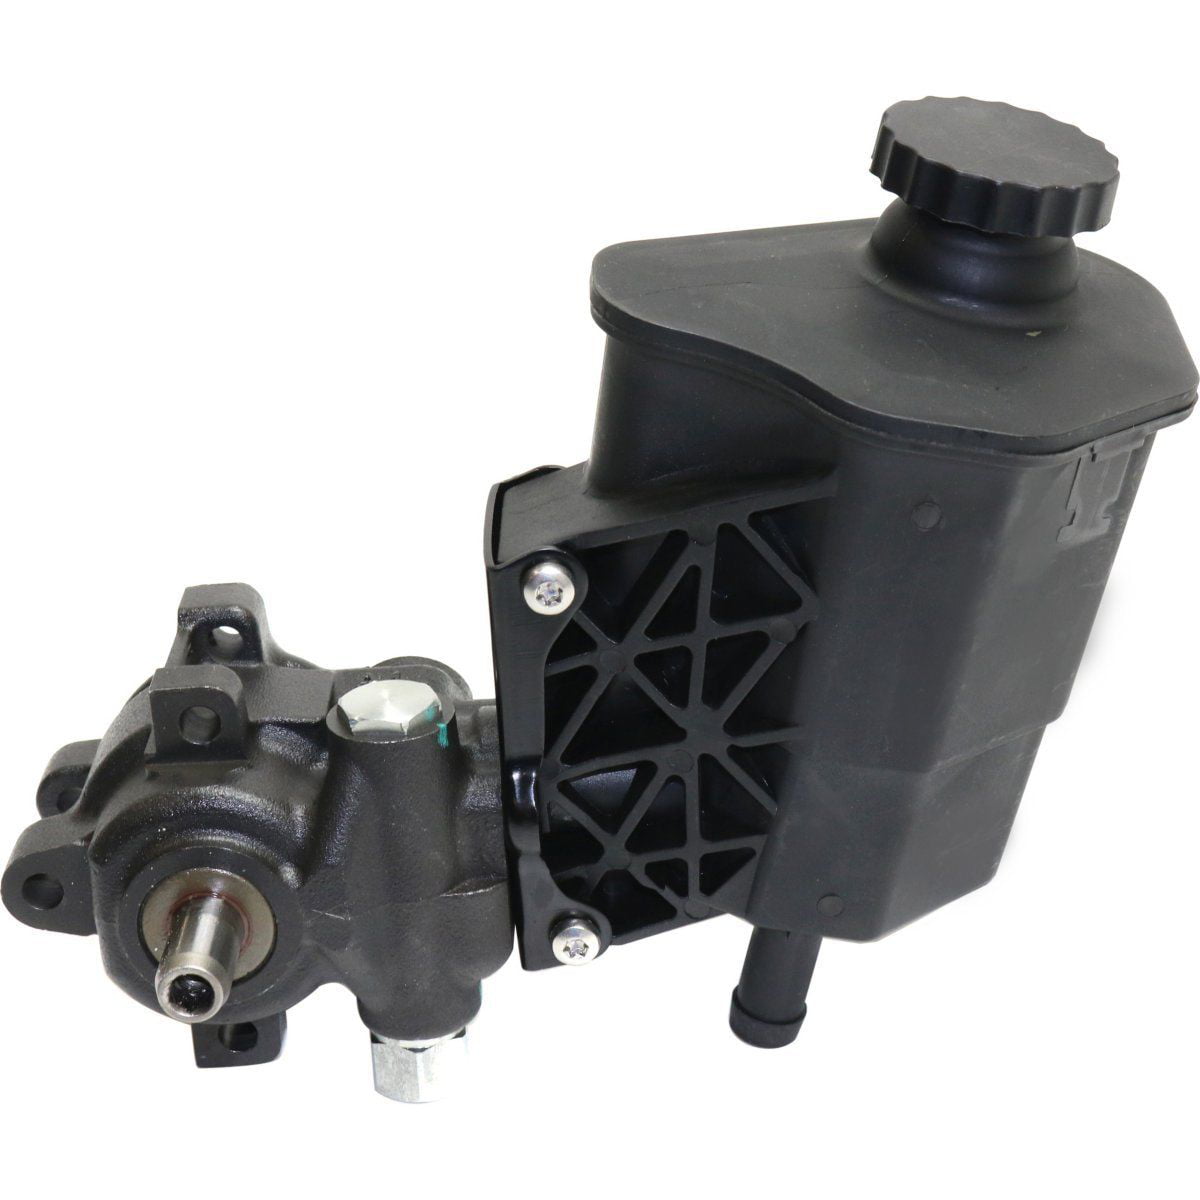 NEW POWER STEERING PUMP WITH RESERVOIR FITS 2003-2007 DODGE RAM 2500